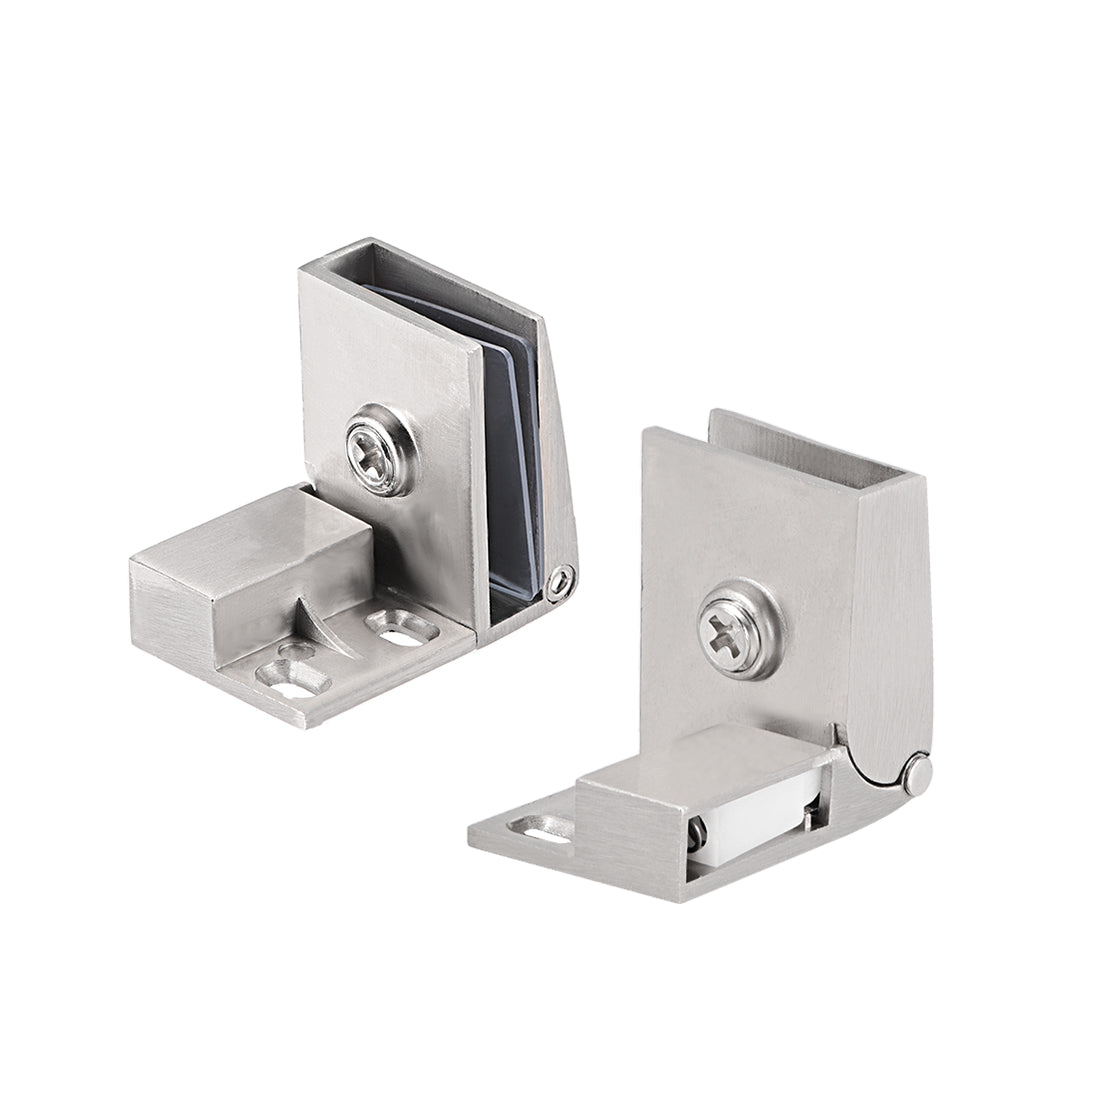 uxcell Uxcell Glass Door Hinge Cupboard Showcase Cabinet Door Hinge Glass Clamp , Zinc Alloy , for 3-5mm Glass Thickness 1Pair